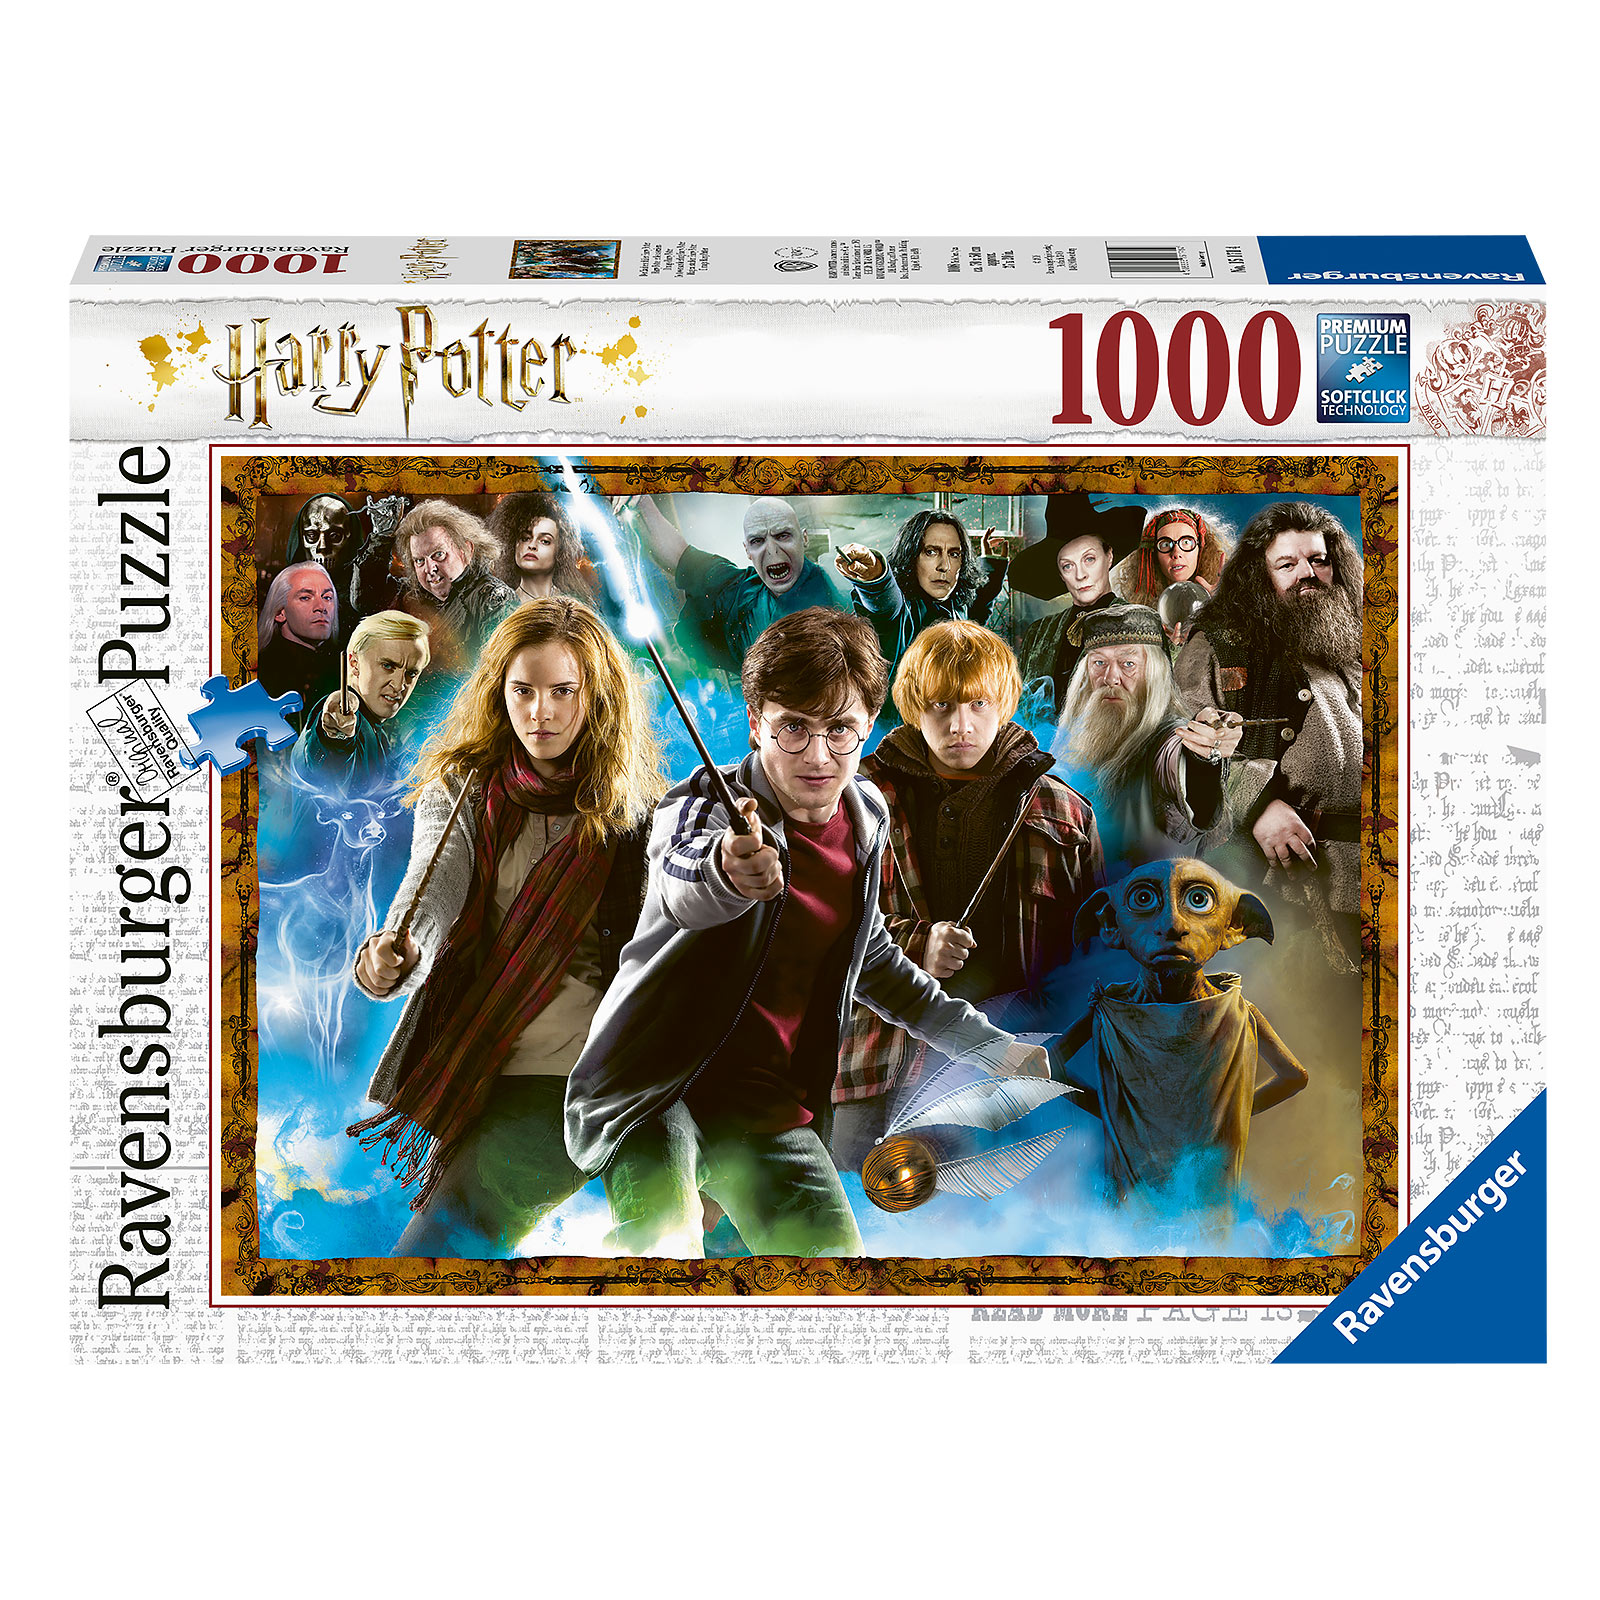 Harry Potter - Charakter Collage Puzzle